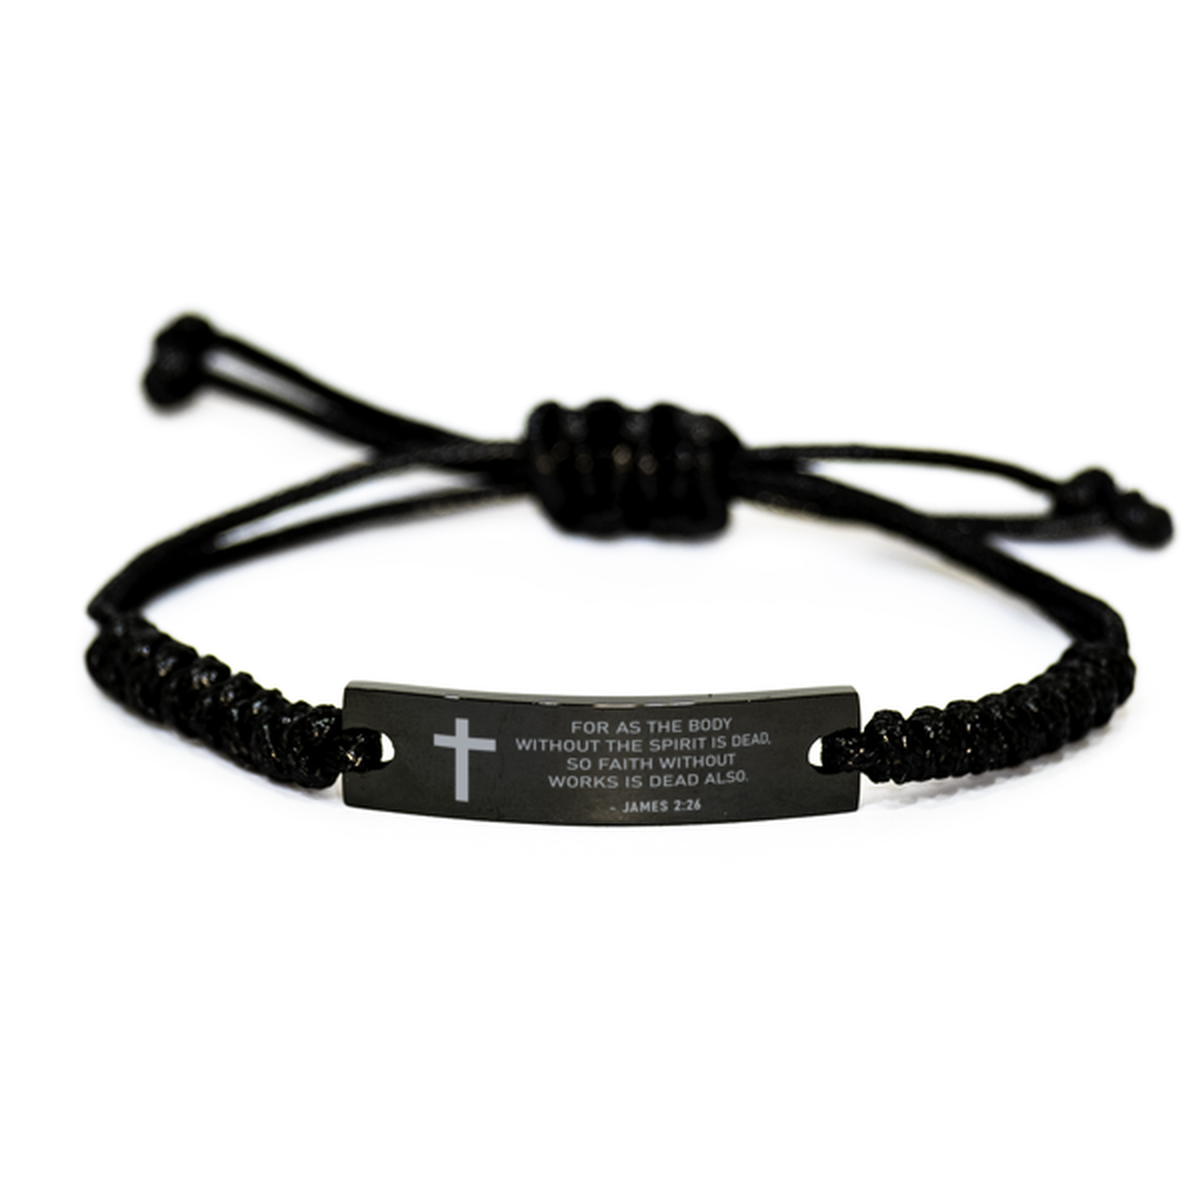 Bible Verse Rope Bracelet, James 2:26 For As The Body Without The Spirit Is Dead, So, Christian Encouraging Gifts For Men Women Boys Girls